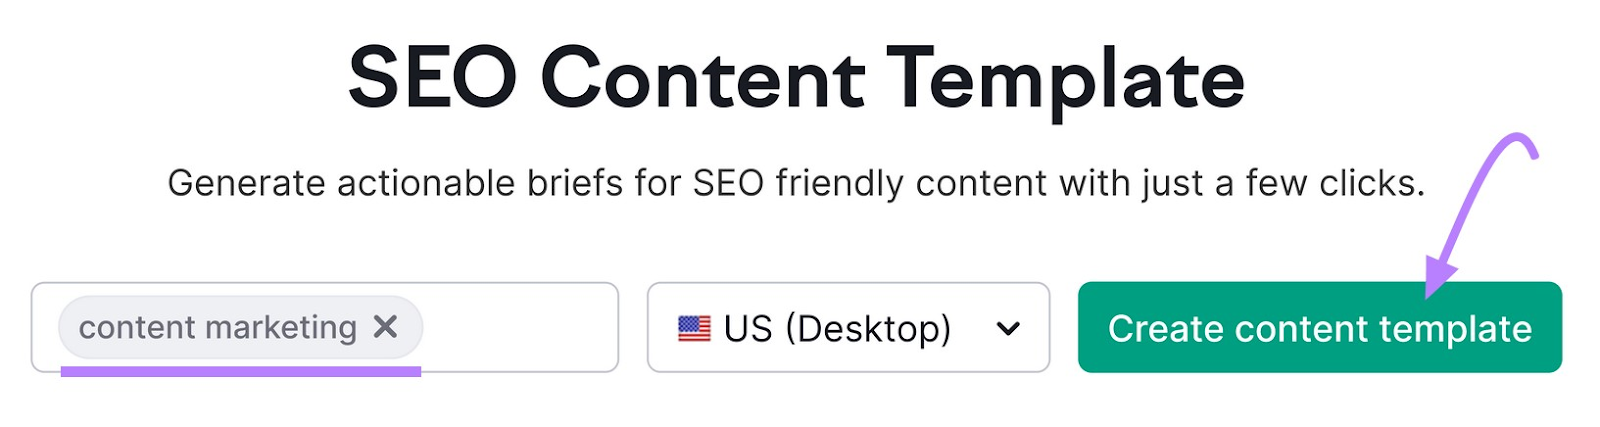 "content marketing" entered in SEO Content Template